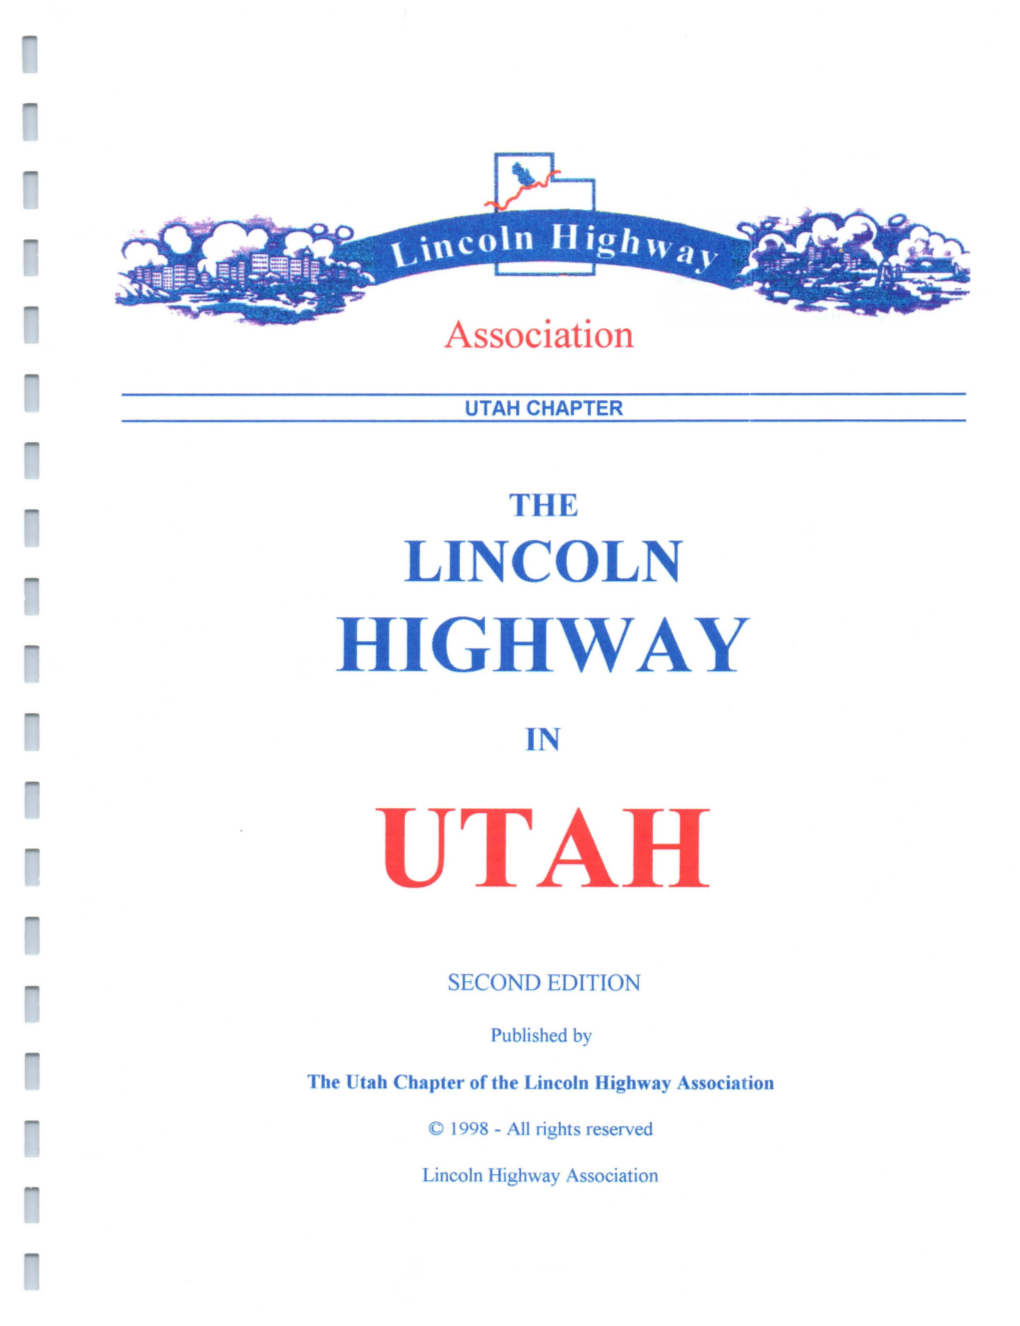 The Lincoln Highway in Utah, 2"D Edition Published by the Utah Chapter of the Lincoln Highway Association Te"-1 and Maps by Jesse G